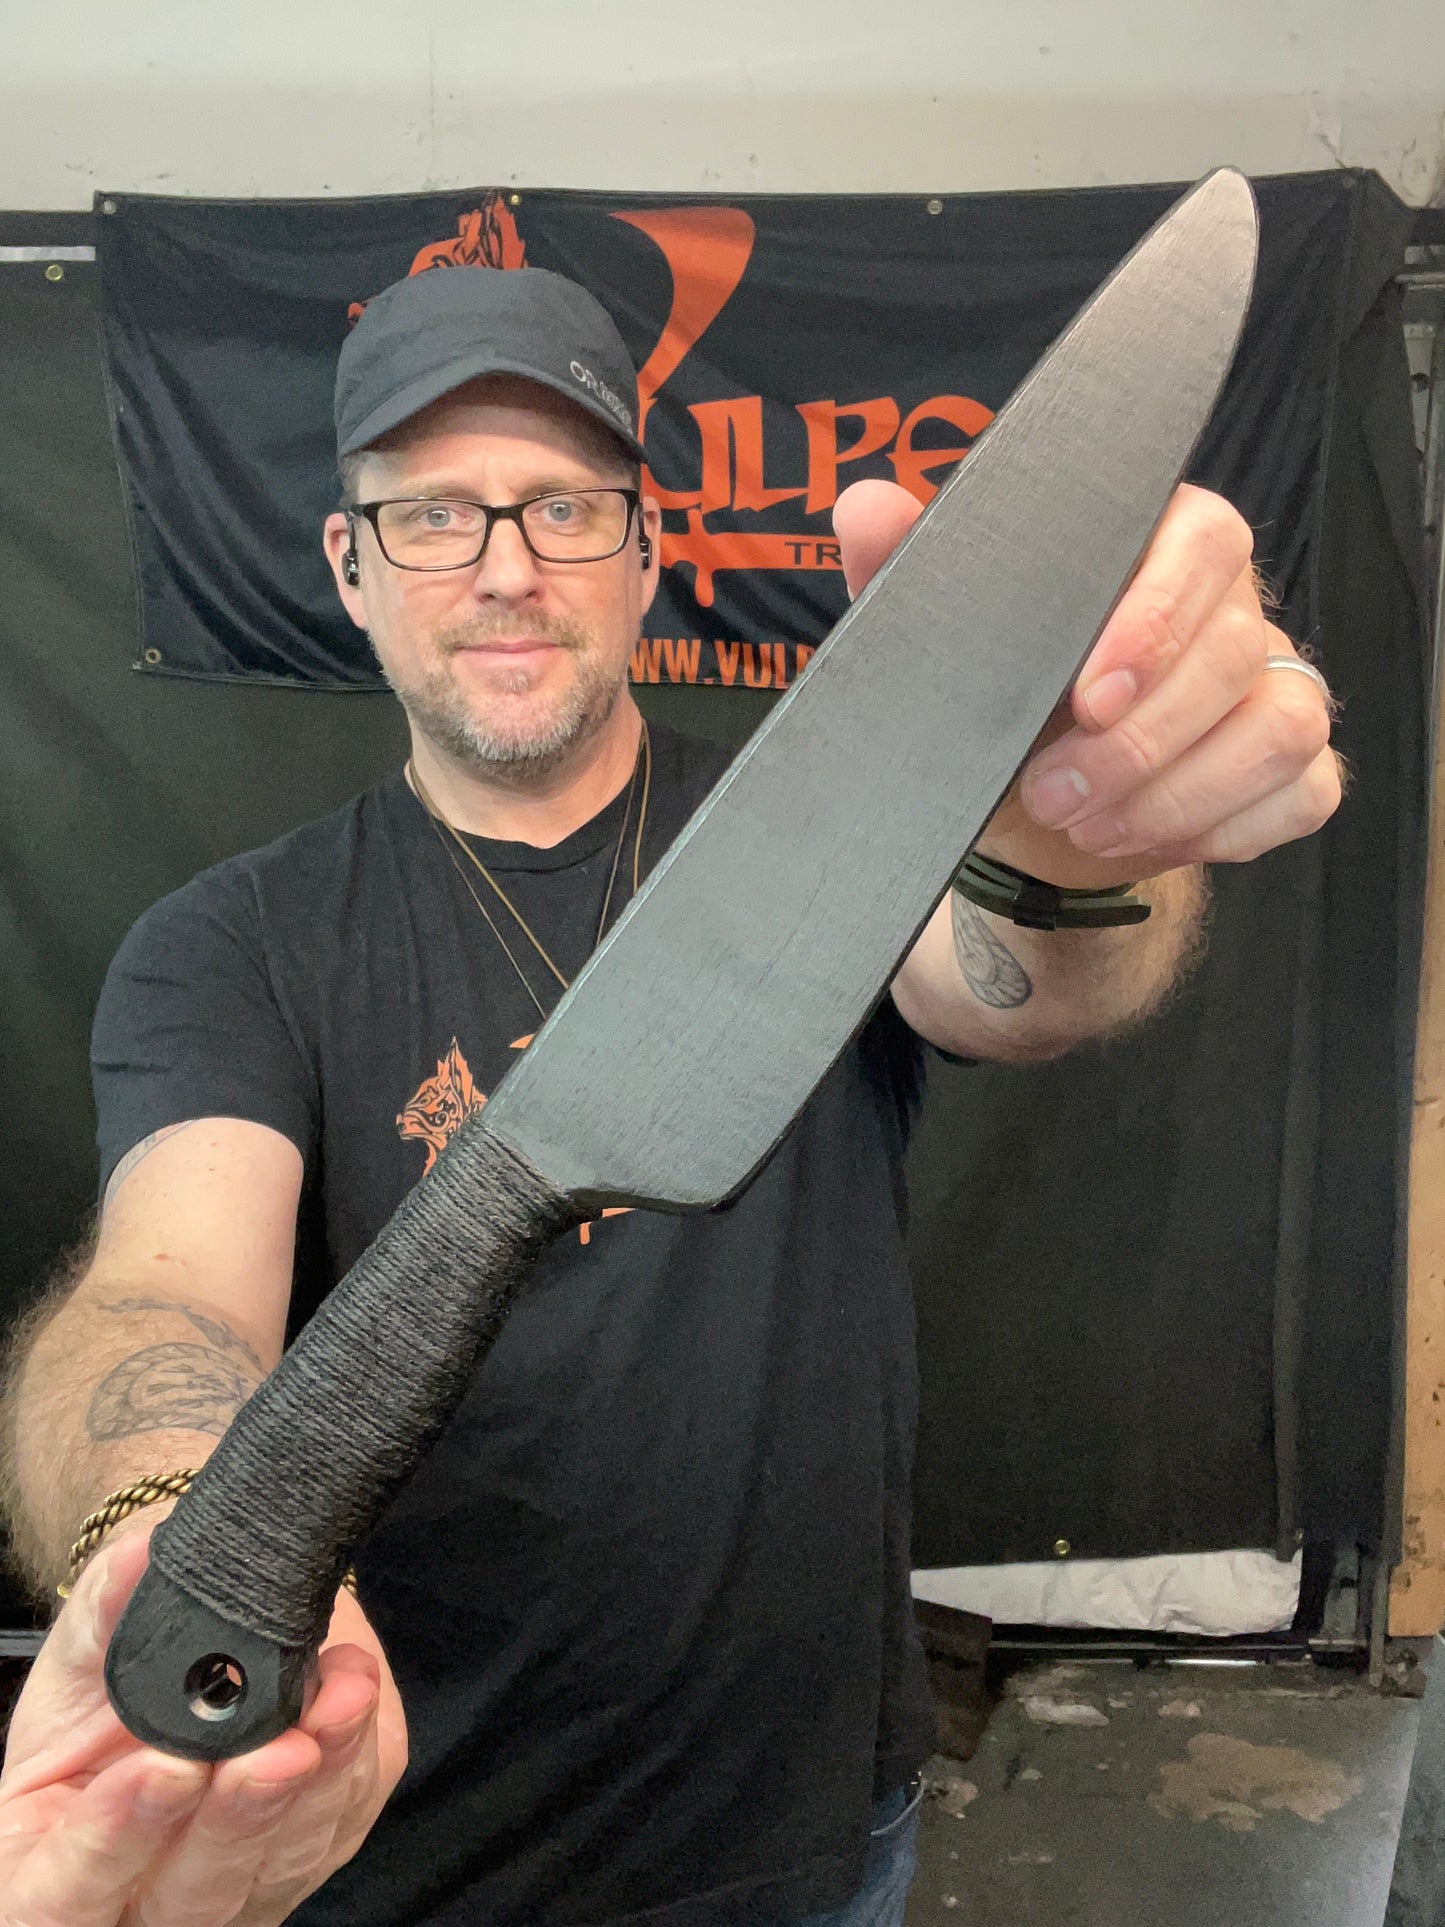 Chef Knife Trainer